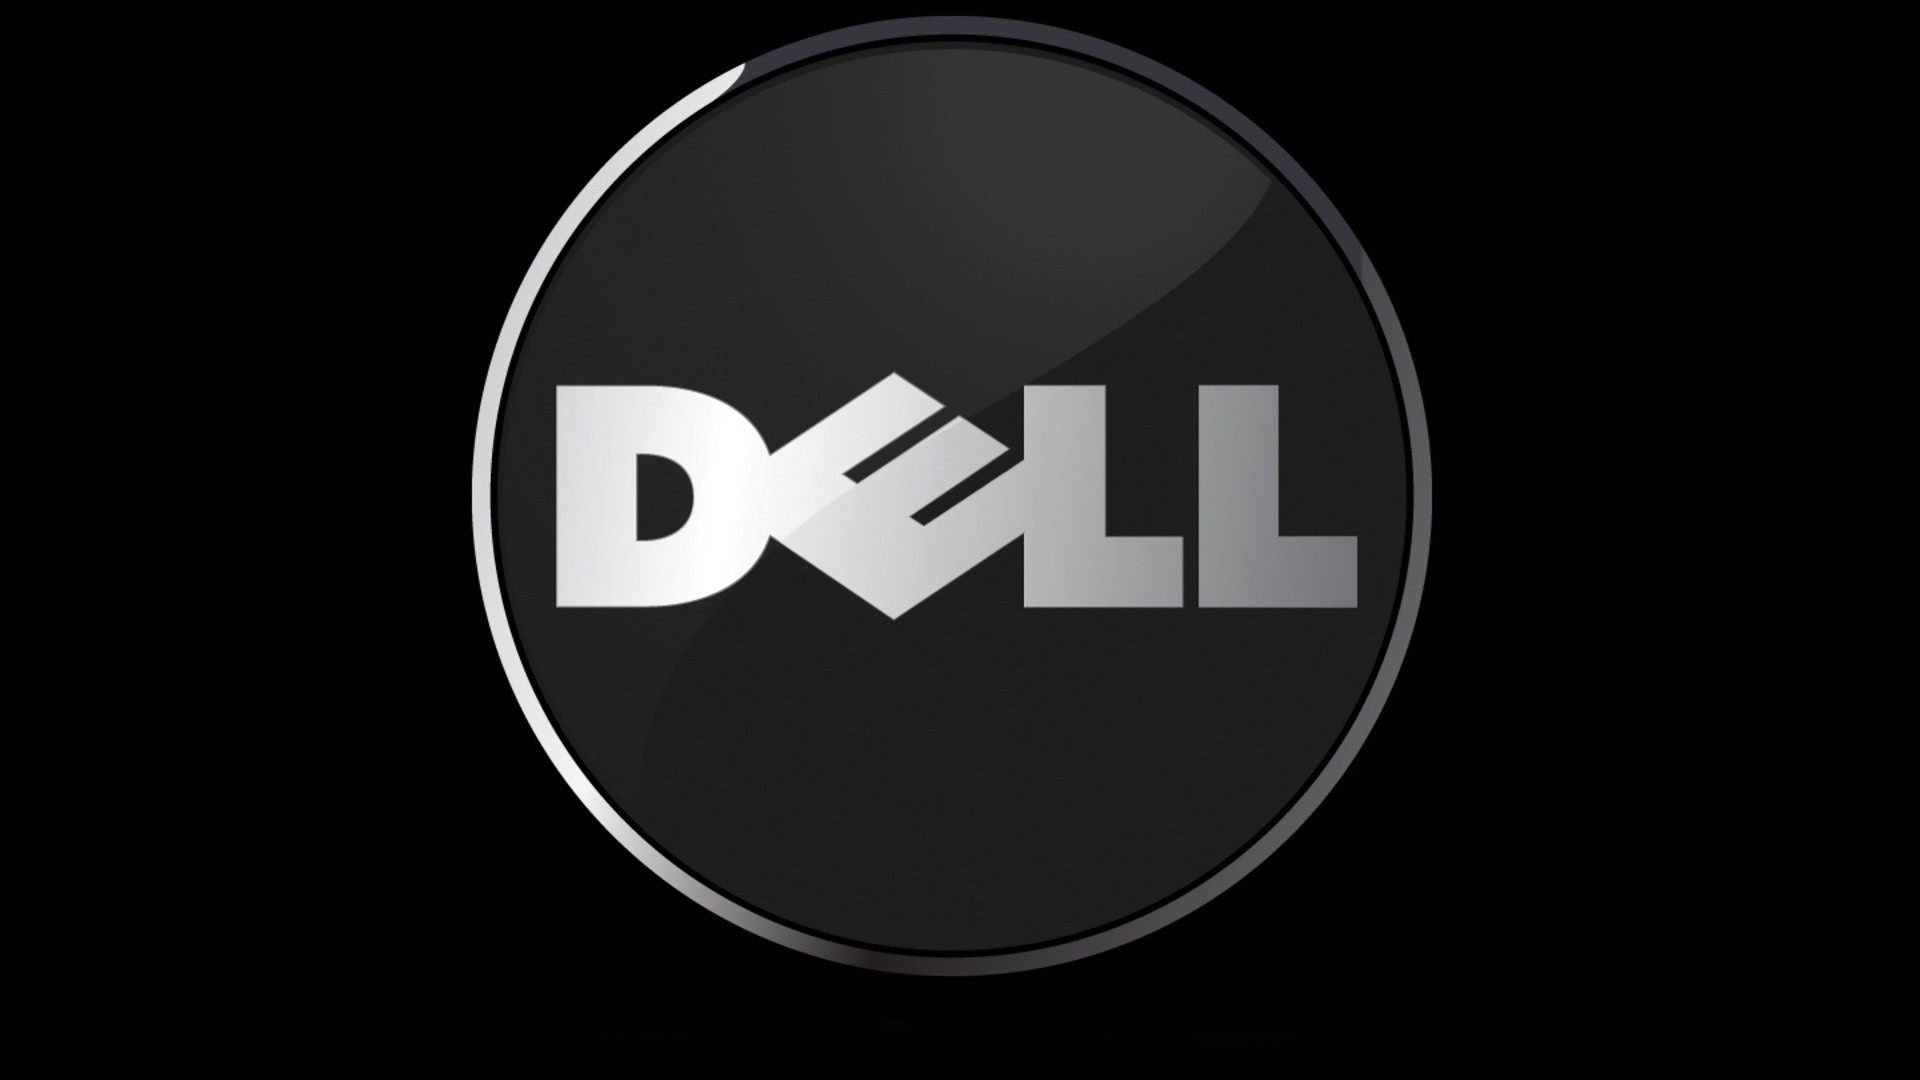 General 1920x1080 Dell computer hardware logo technology